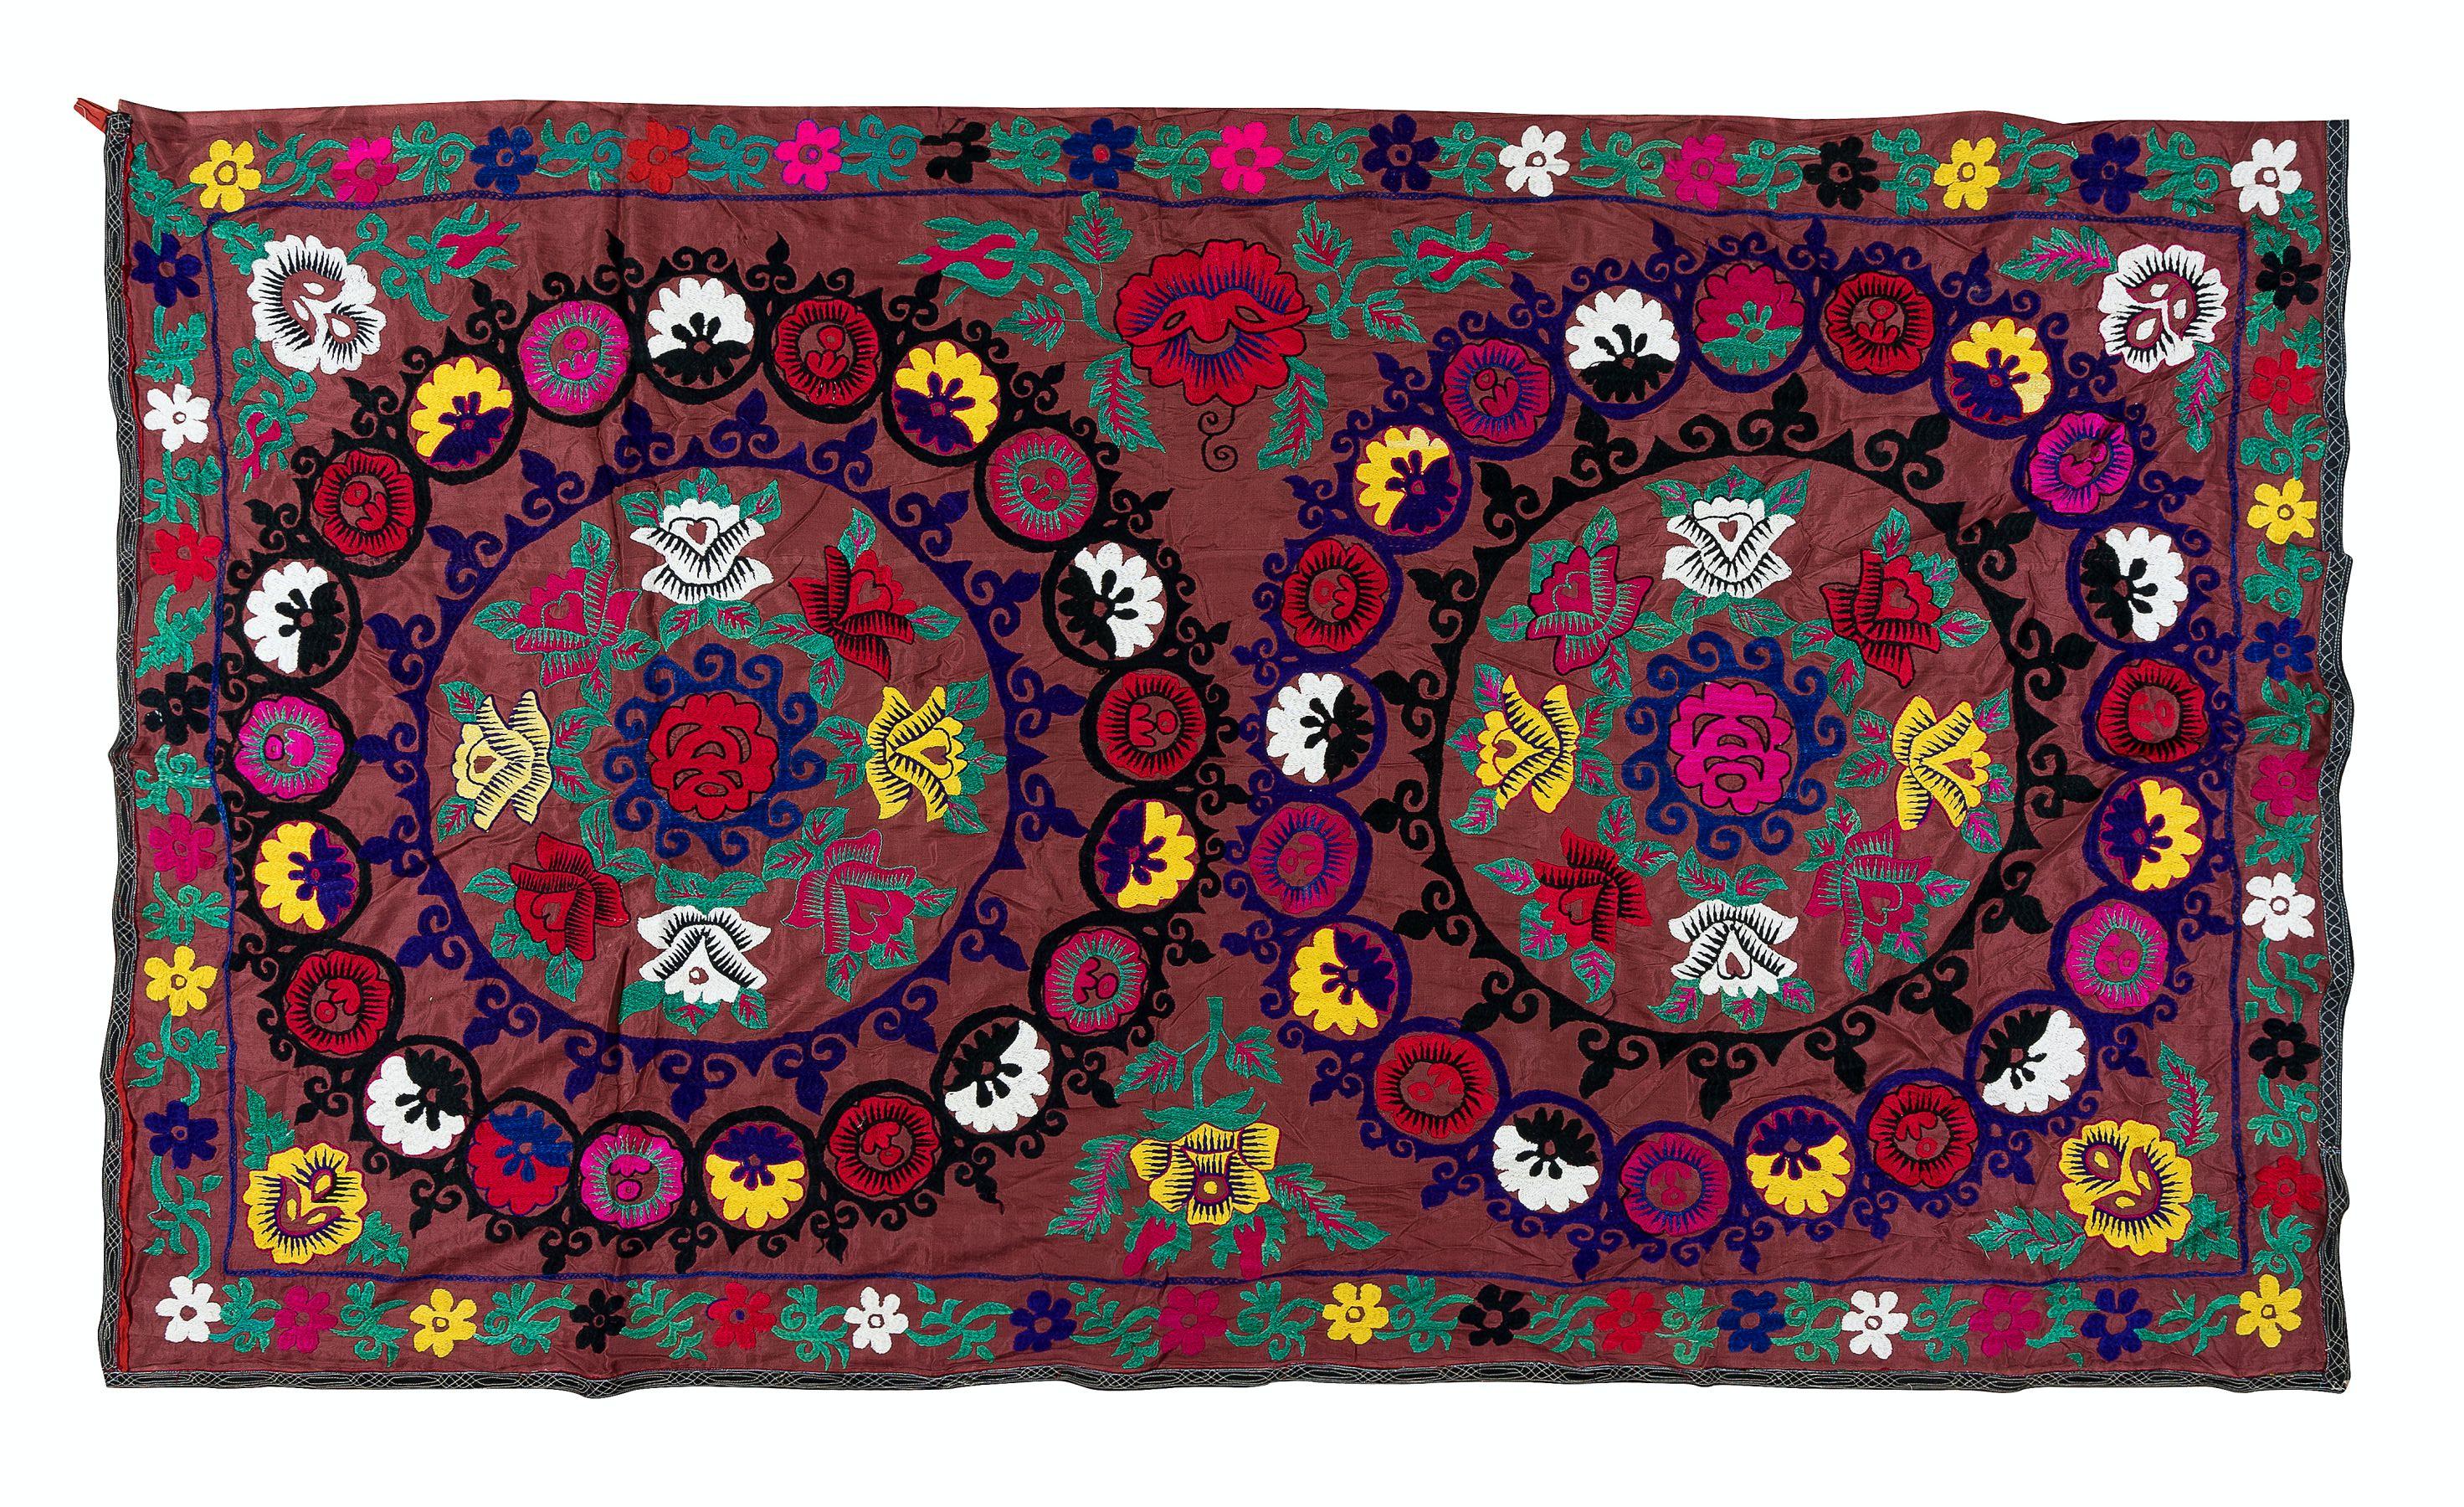 20th Century Decorative Silk Embroidery Bed Cover, Uzbek 1970s Suzani Wall Hanging For Sale